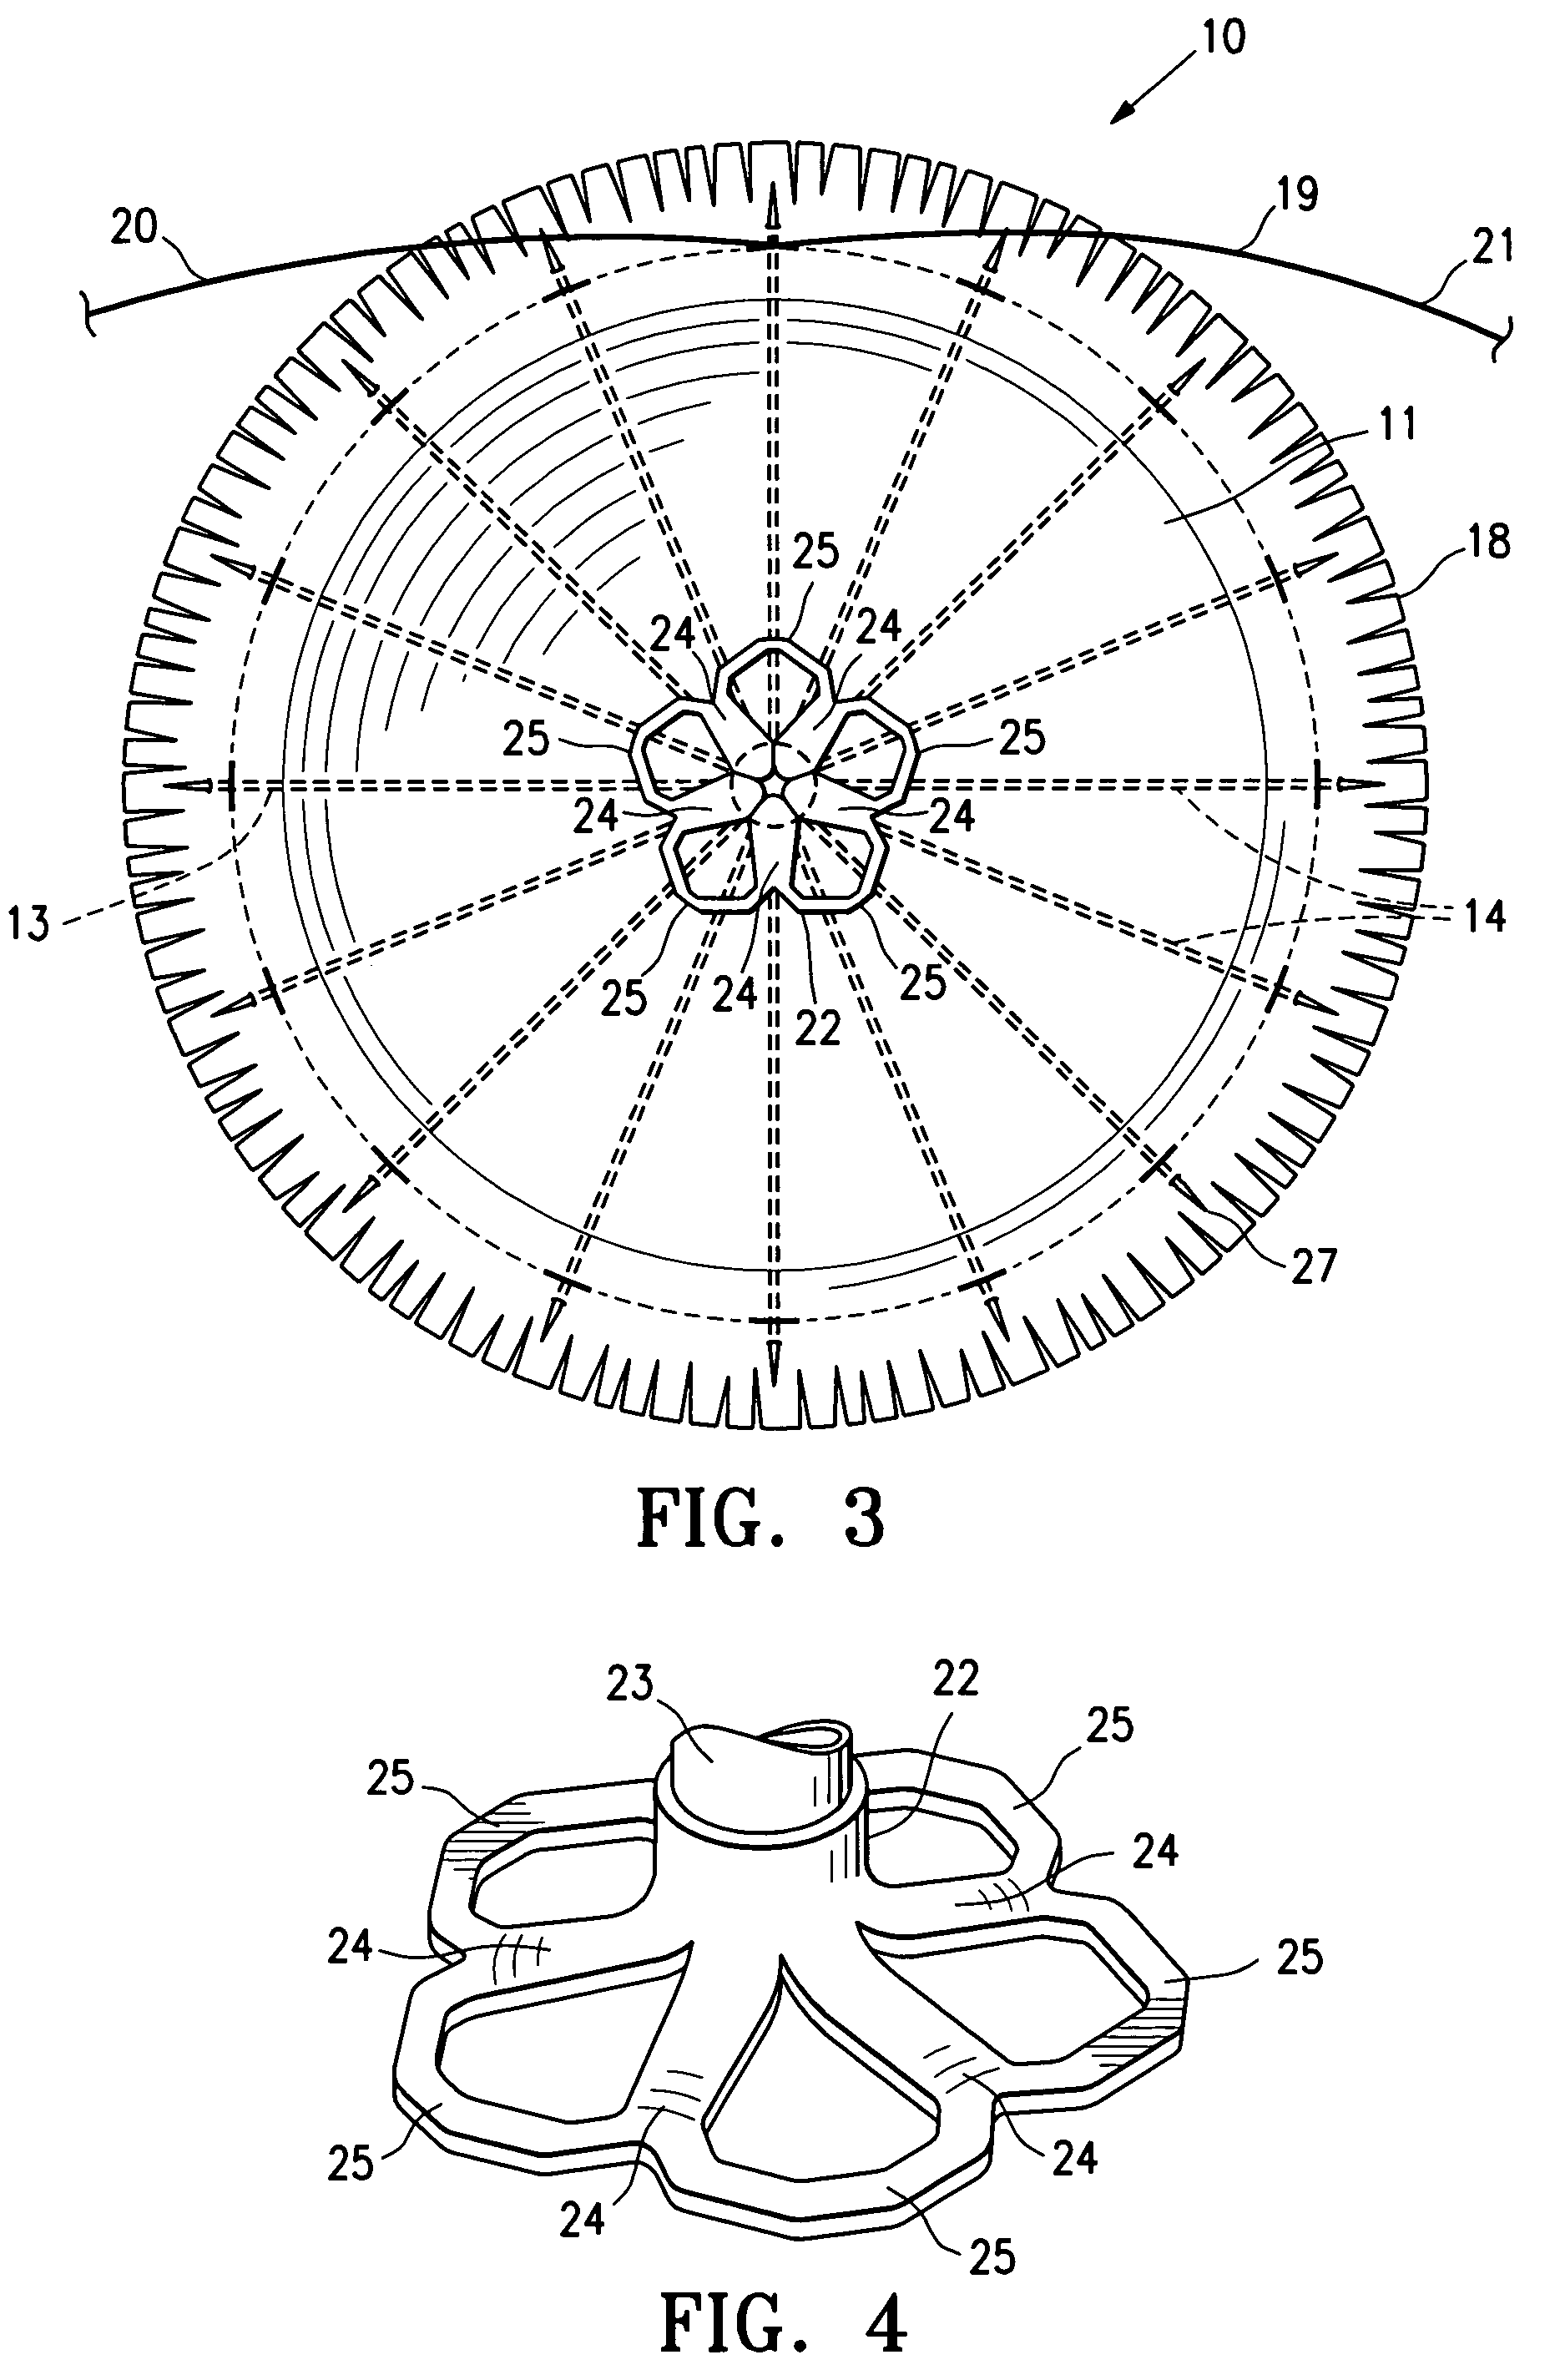 Peripheral seal for a ventricular partitioning device